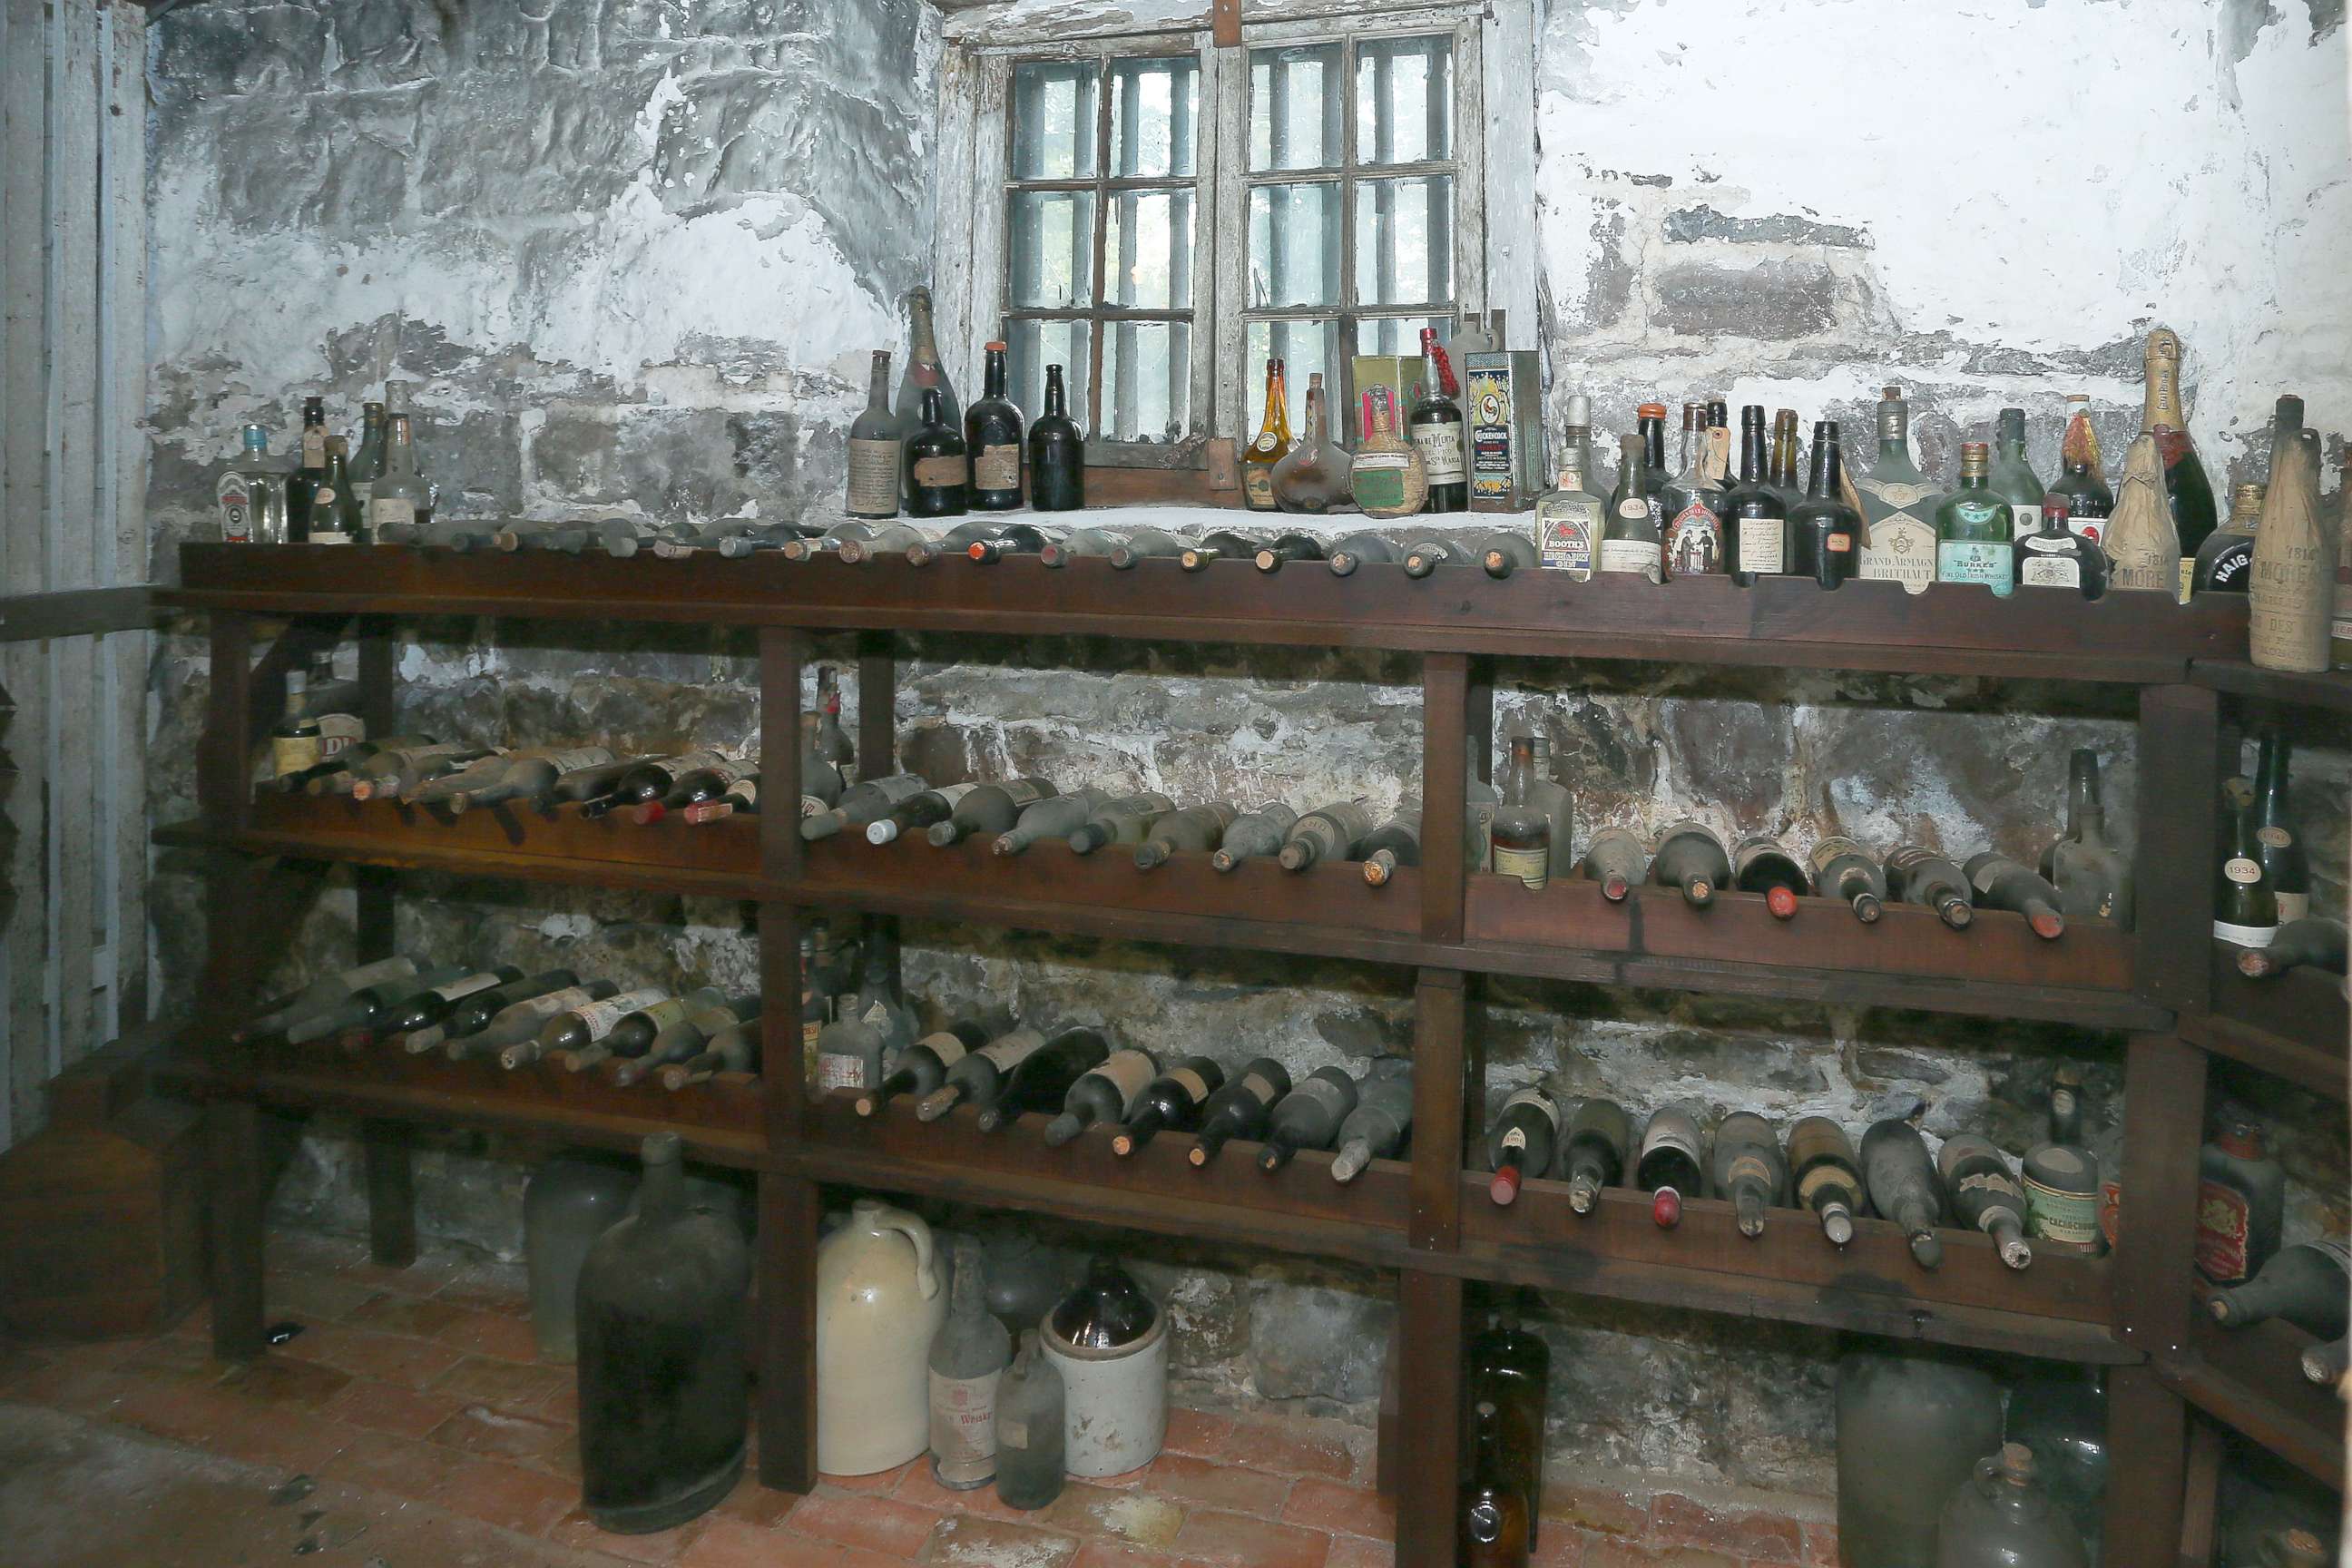 PHOTO: The wine cellar at the Liberty Hall Museum at Kean University in New Jersey.